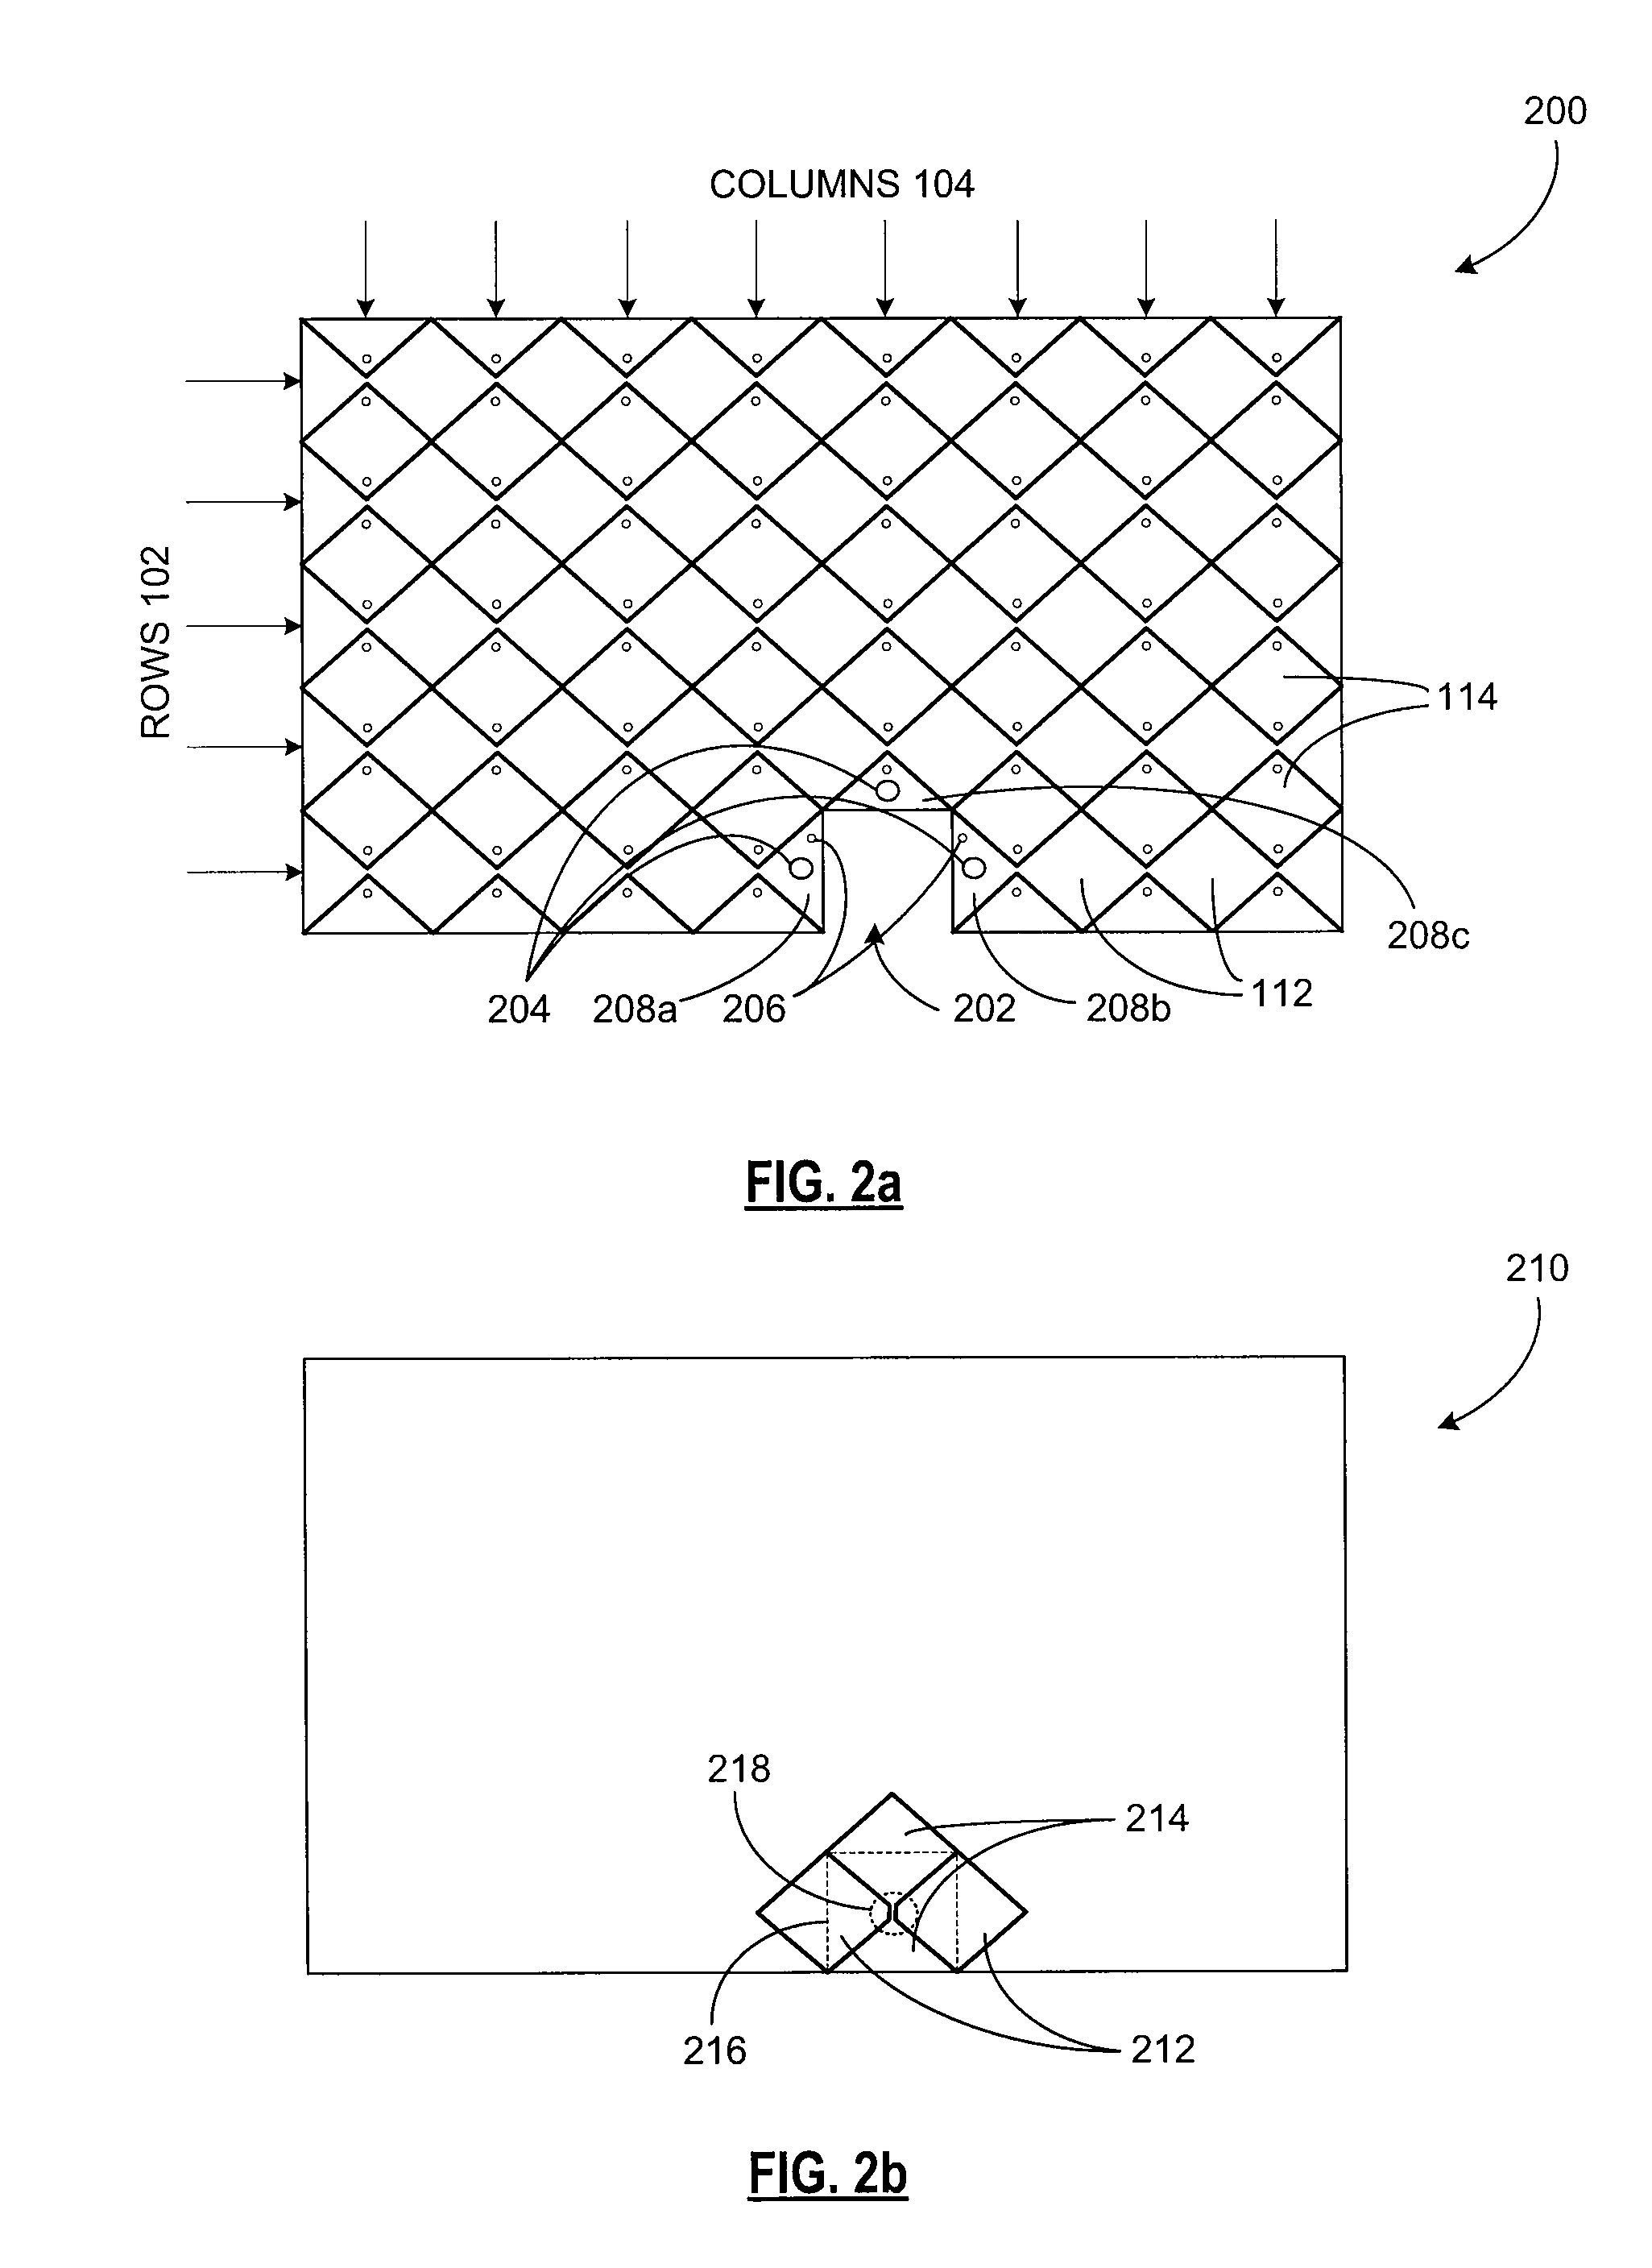 Capacitive sensor having electrodes arranged on the substrate and the flex circuit